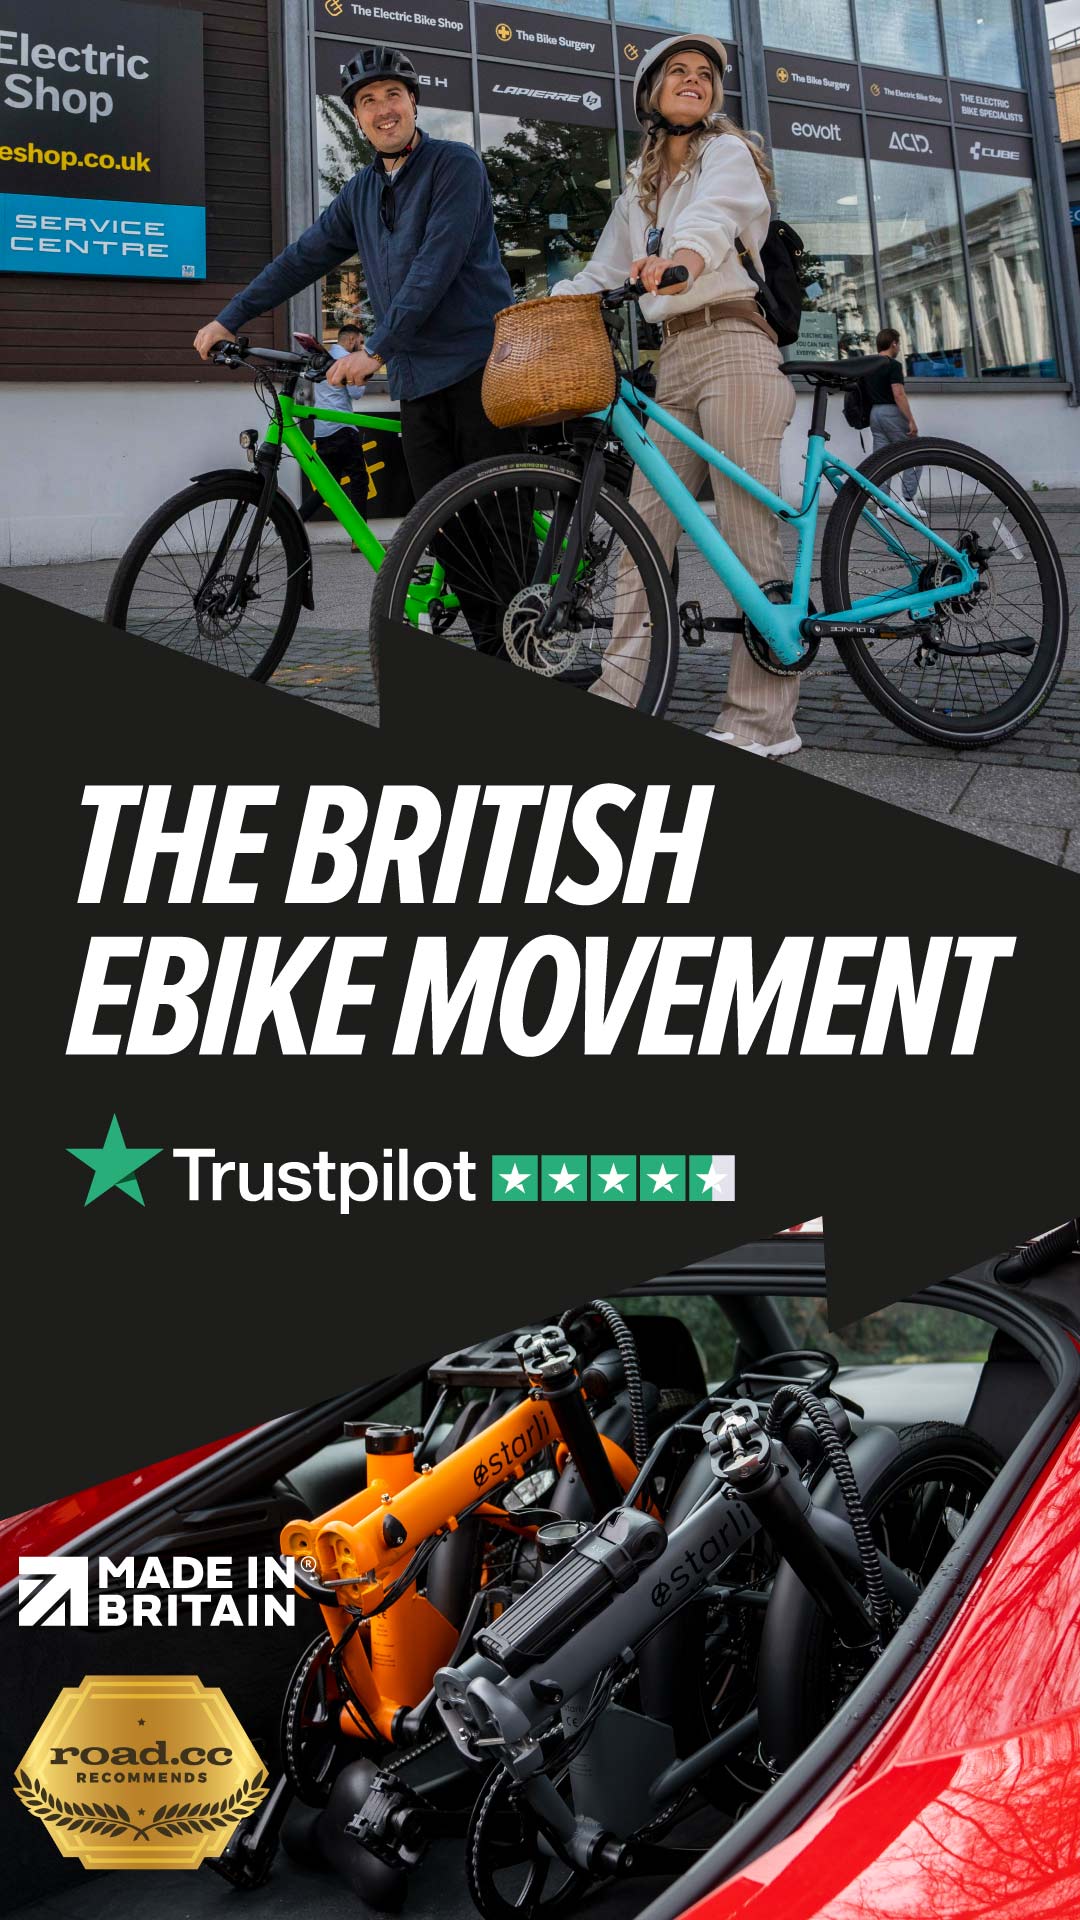 The British eBike movement. Estarli design and fully assemble eBikes in Hertfordshire and are proud members of Made In Britain.